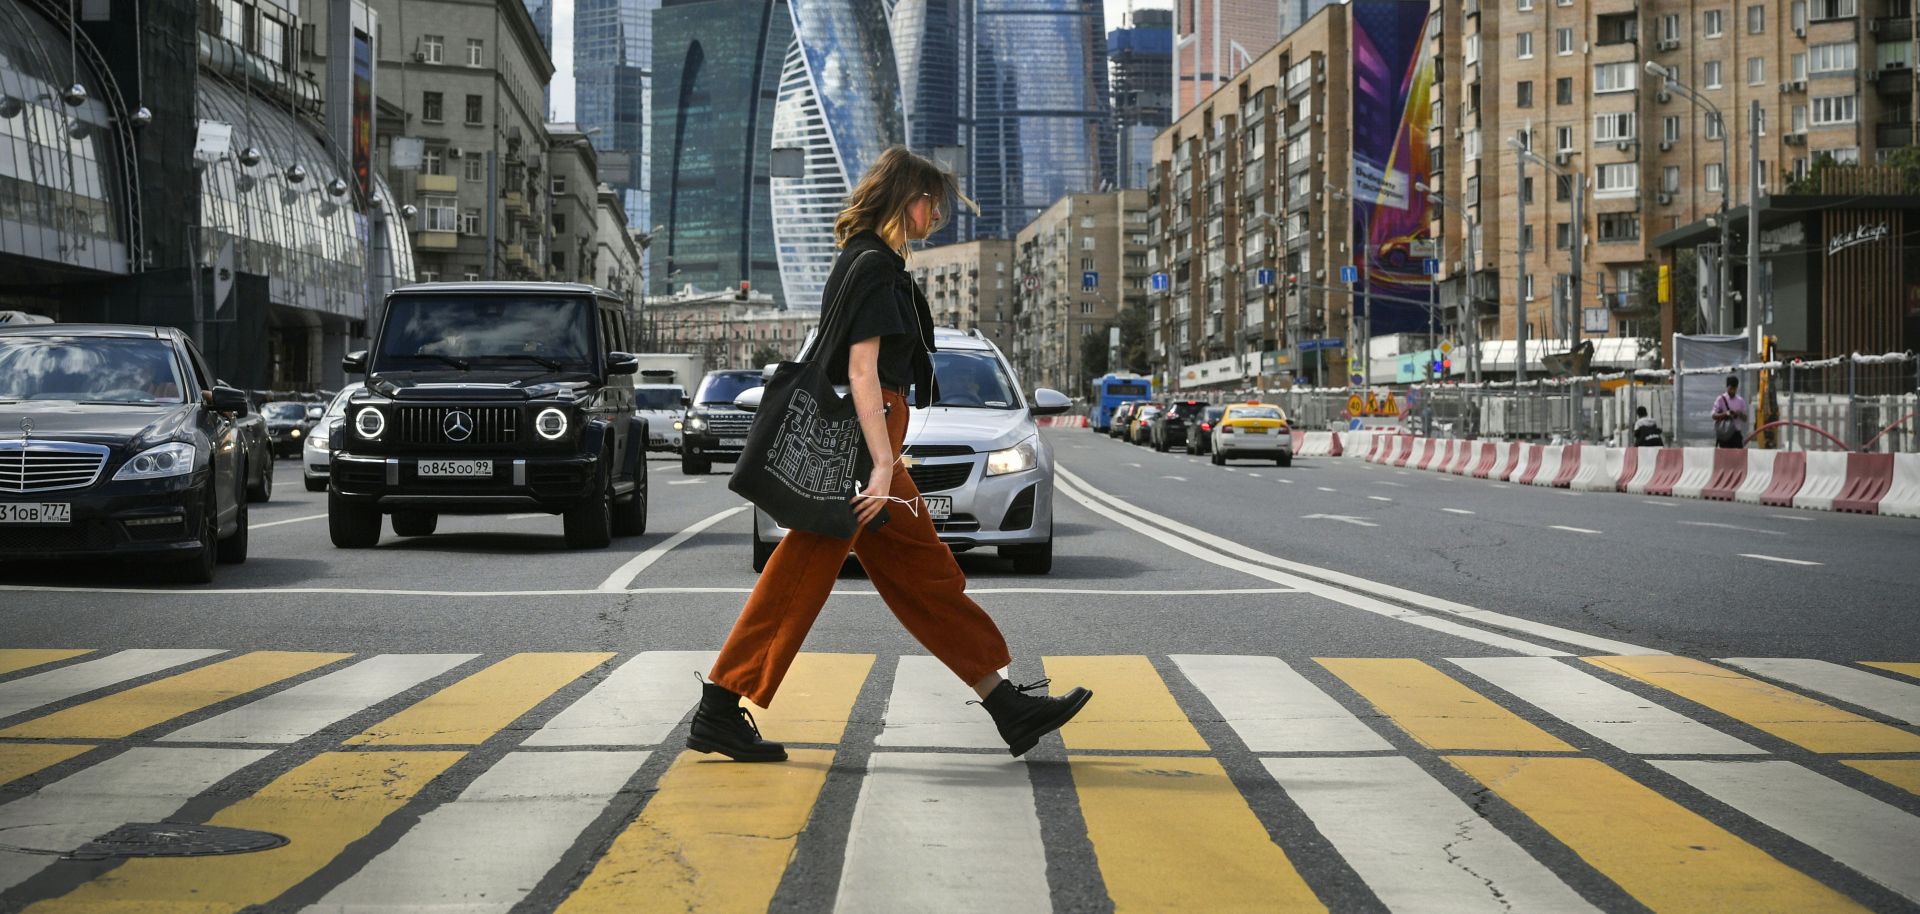 This photo shows a woman crossing a street near downtown Moscow, Russia.